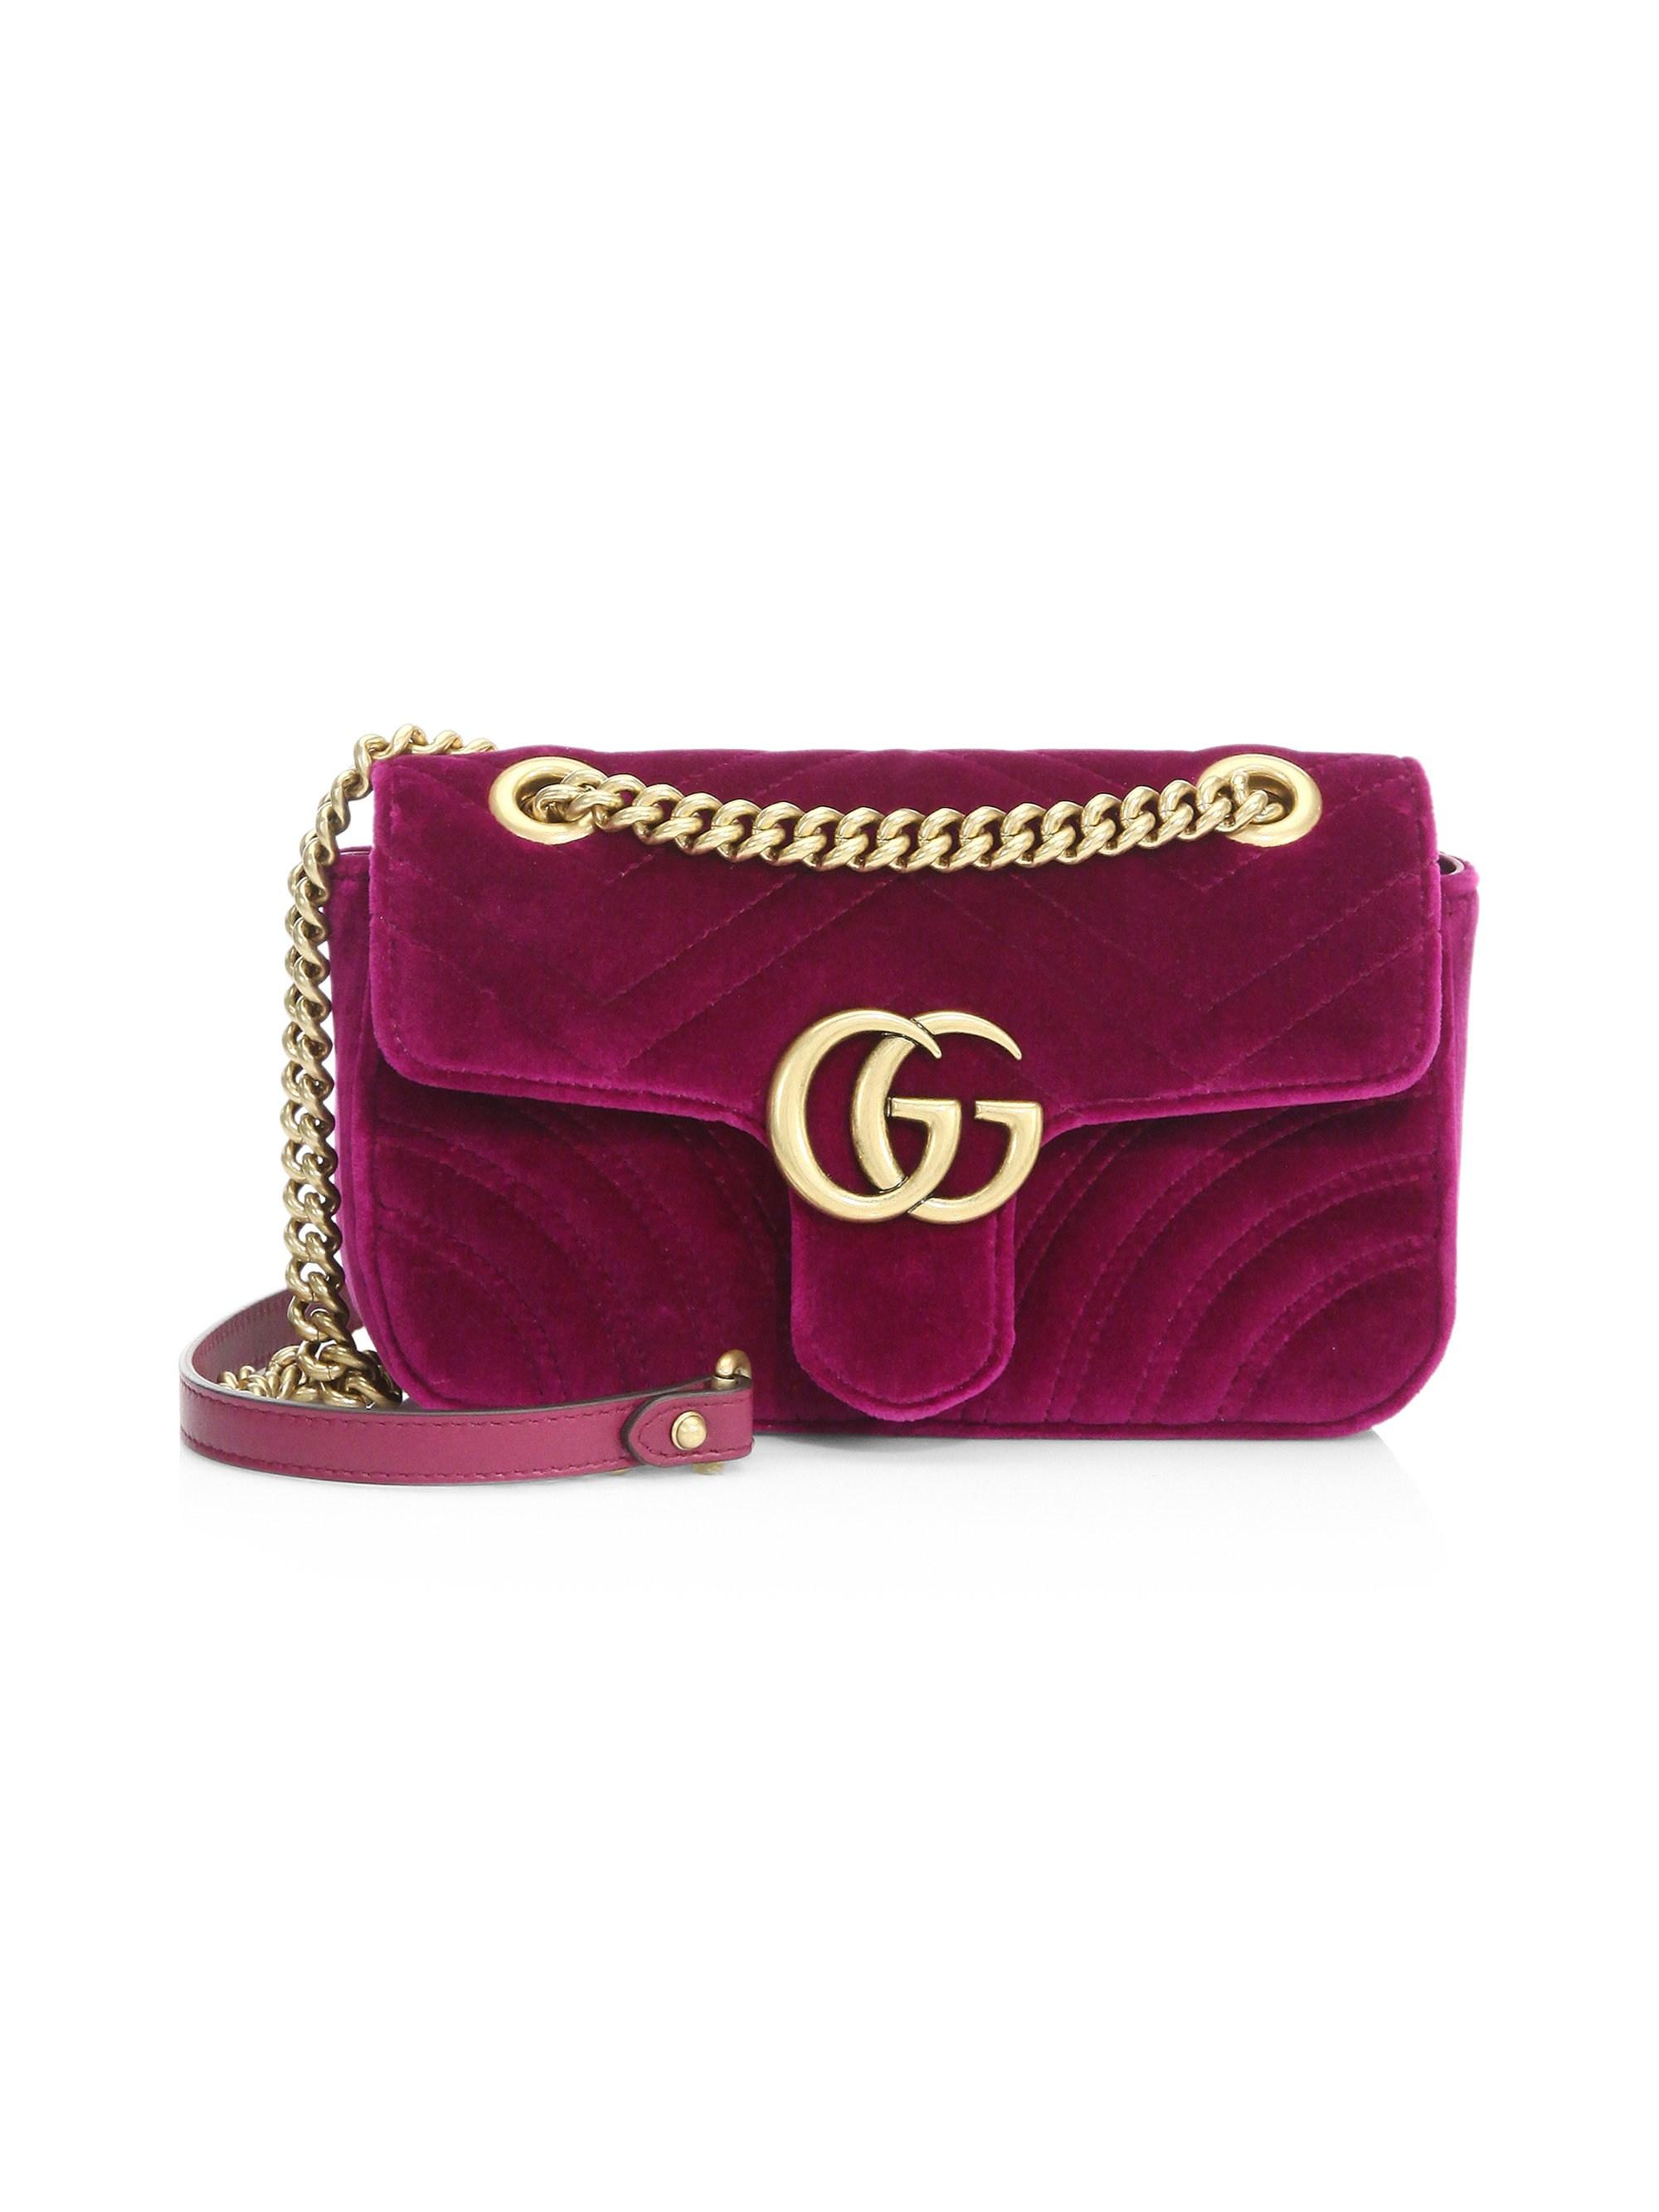 Gucci GG Marmont Bag in (Red) Lyst